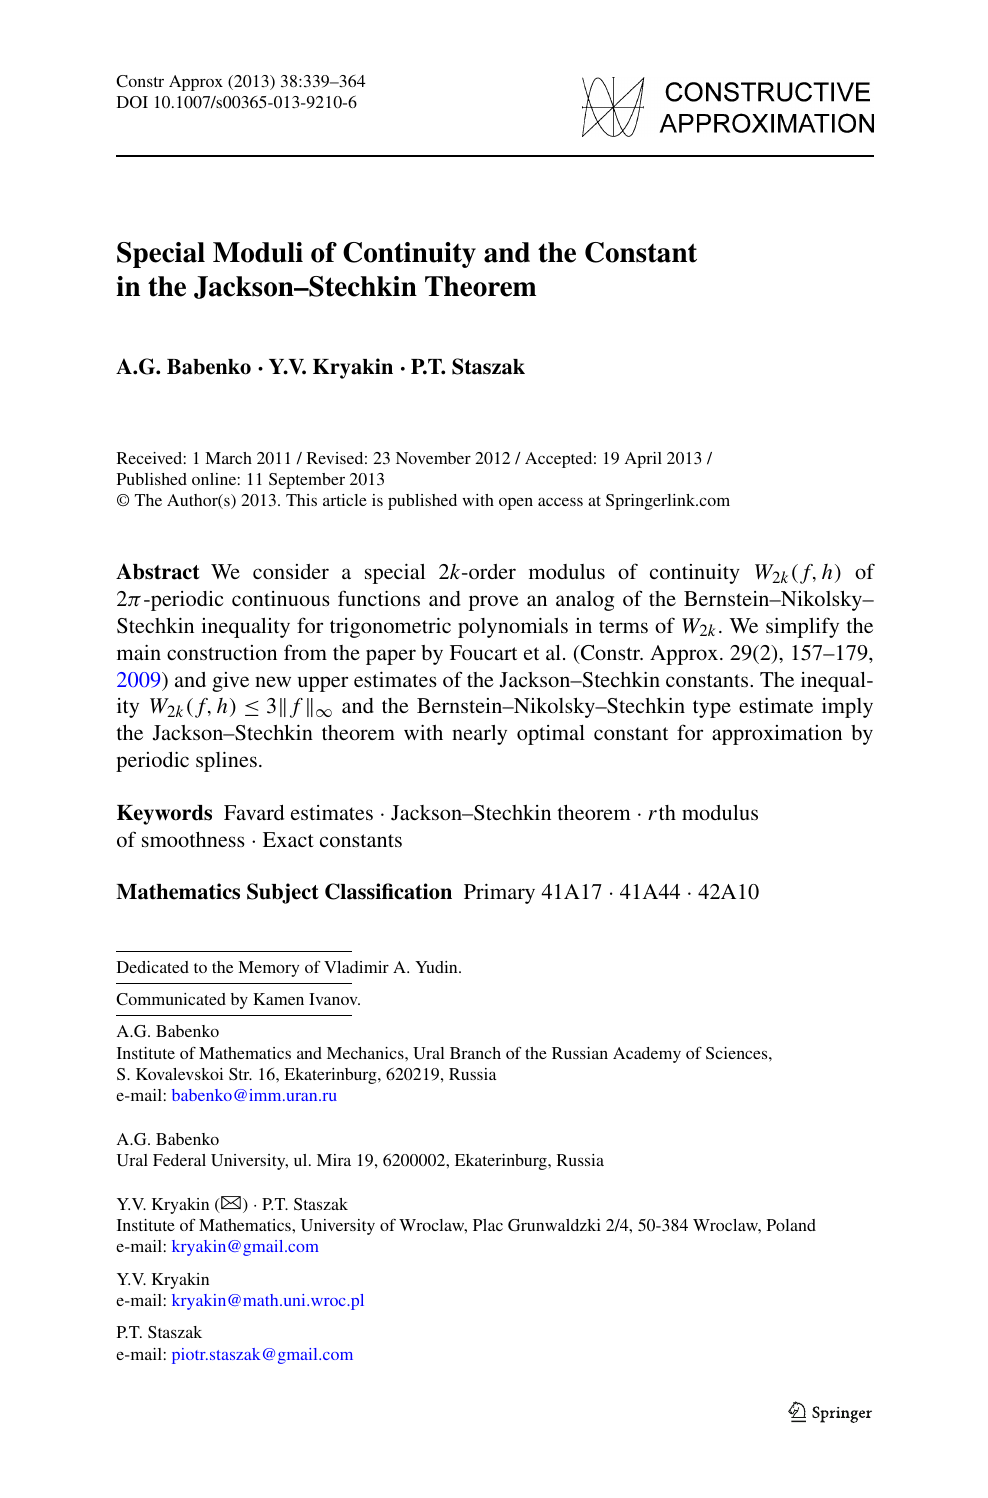 Special Moduli Of Continuity And The Constant In The Jackson Stechkin Theorem Topic Of Research Paper In Mathematics Download Scholarly Article Pdf And Read For Free On Cyberleninka Open Science Hub